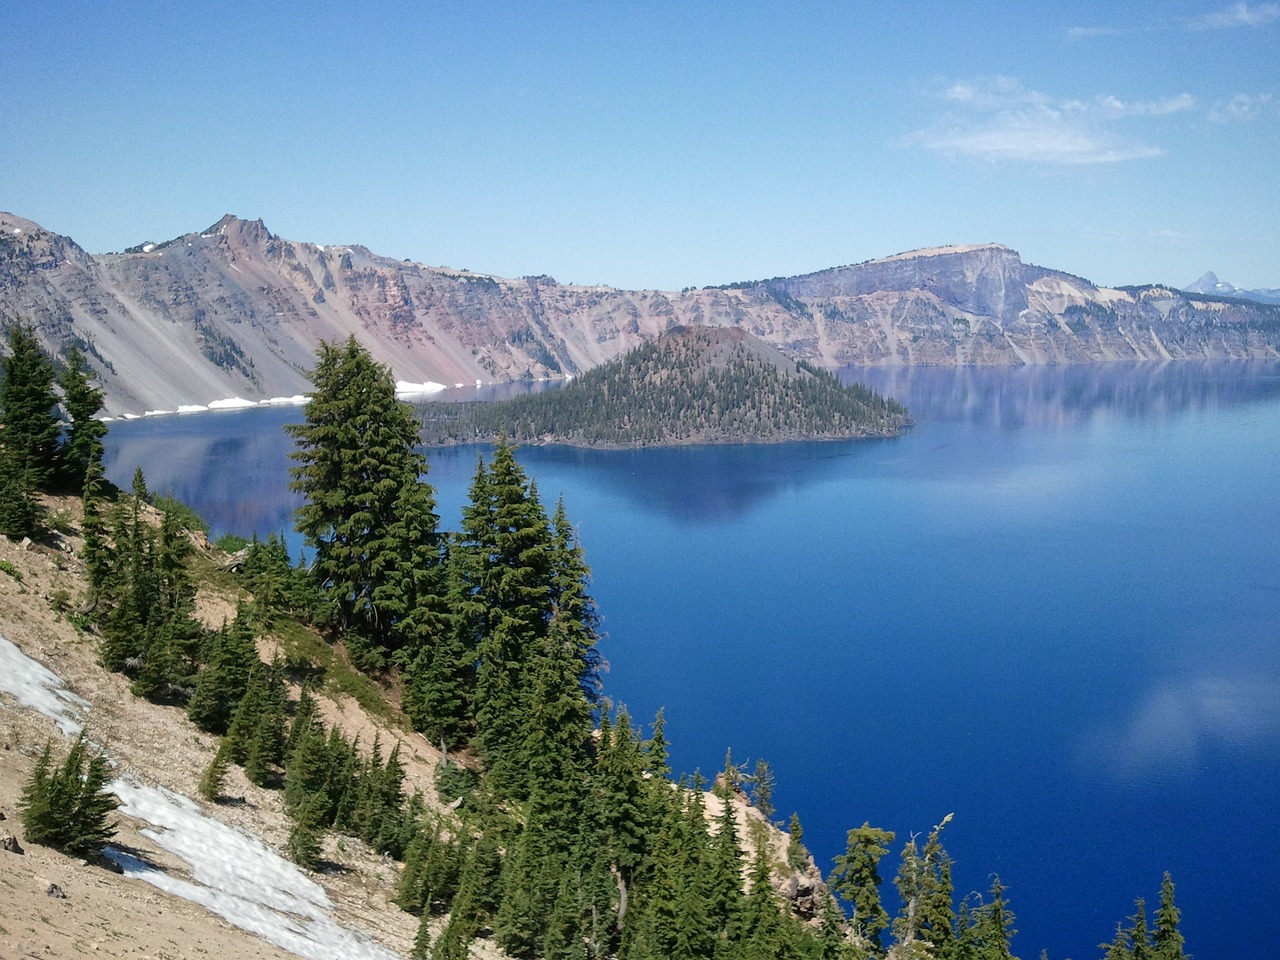 Scenic 2-Day Escape at Crater Lake National Park